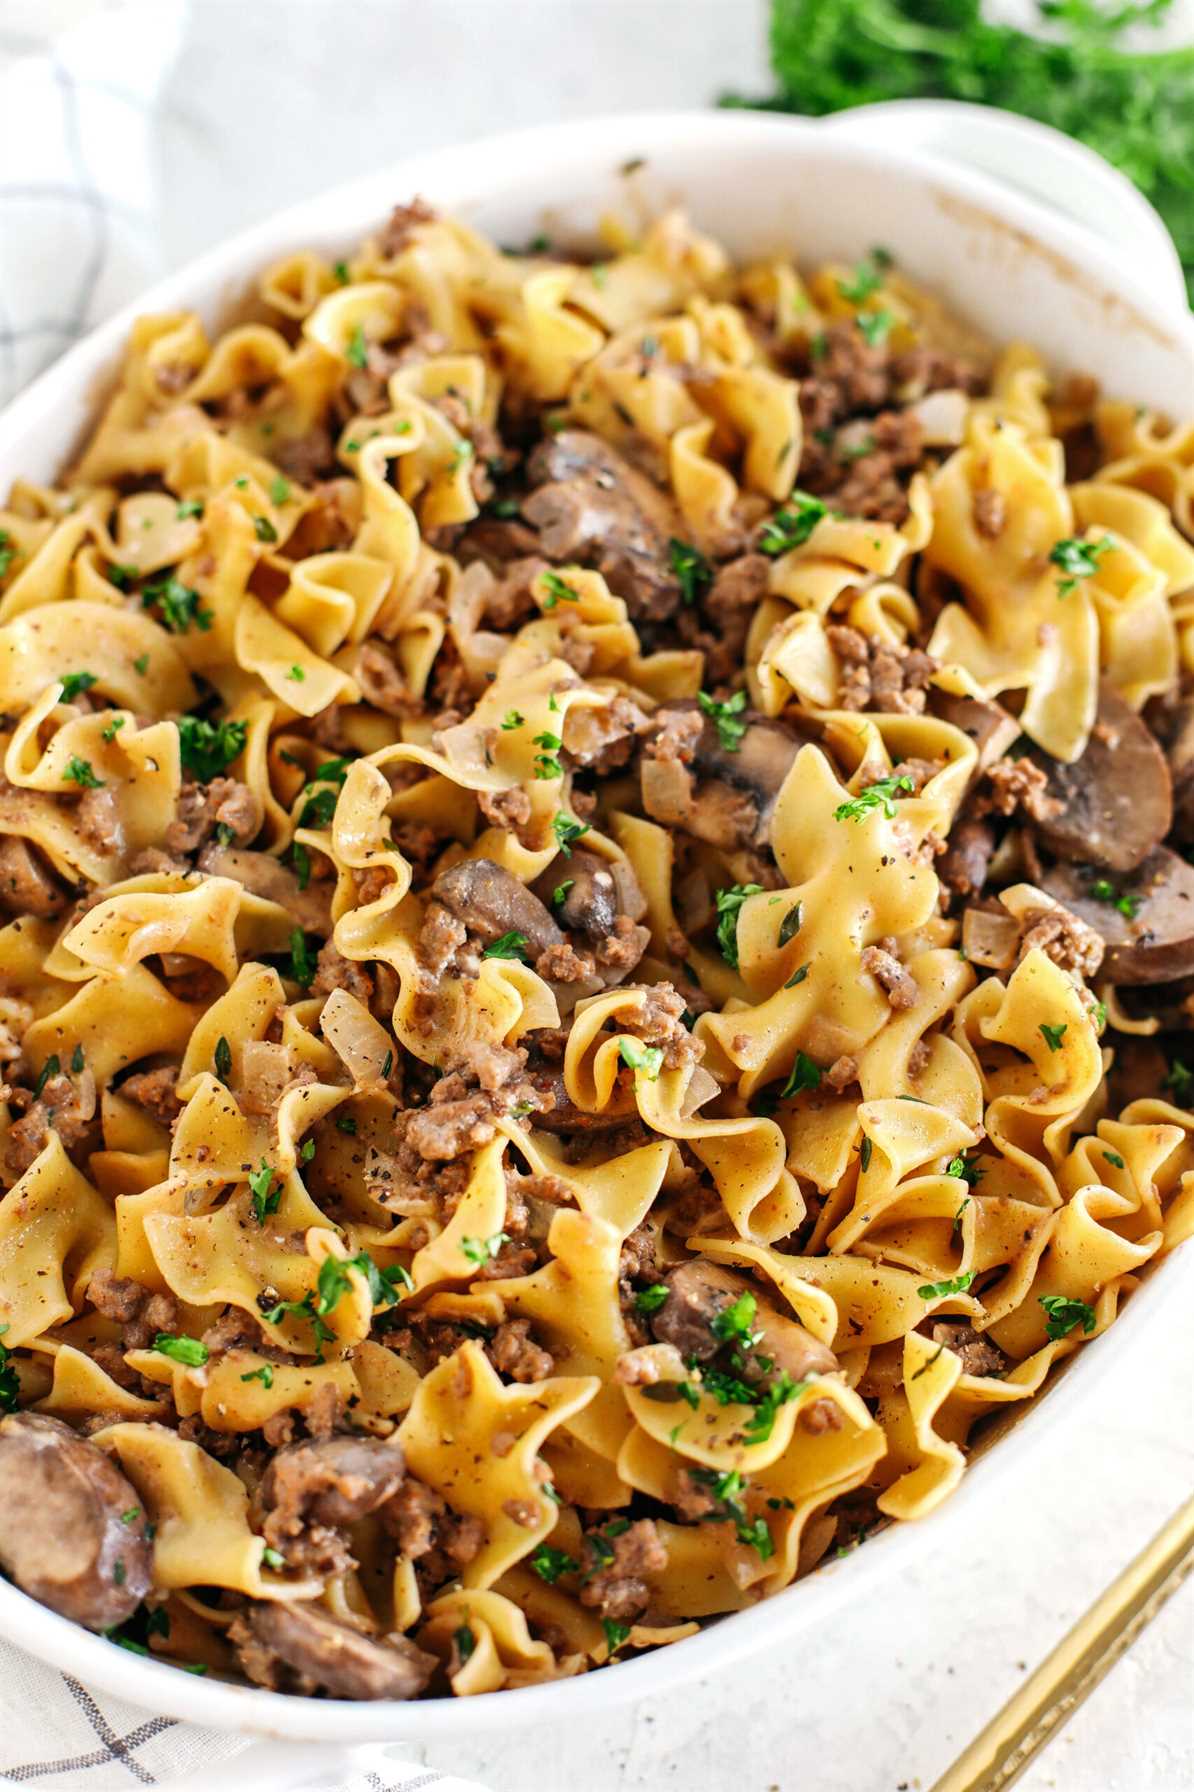 This Easy Beef Stroganoff Casserole is the ultimate family-friendly comfort food! The perfect weeknight meal made with egg noodles and smothered in the most delicious creamy mushroom sauce in just 30 minutes!